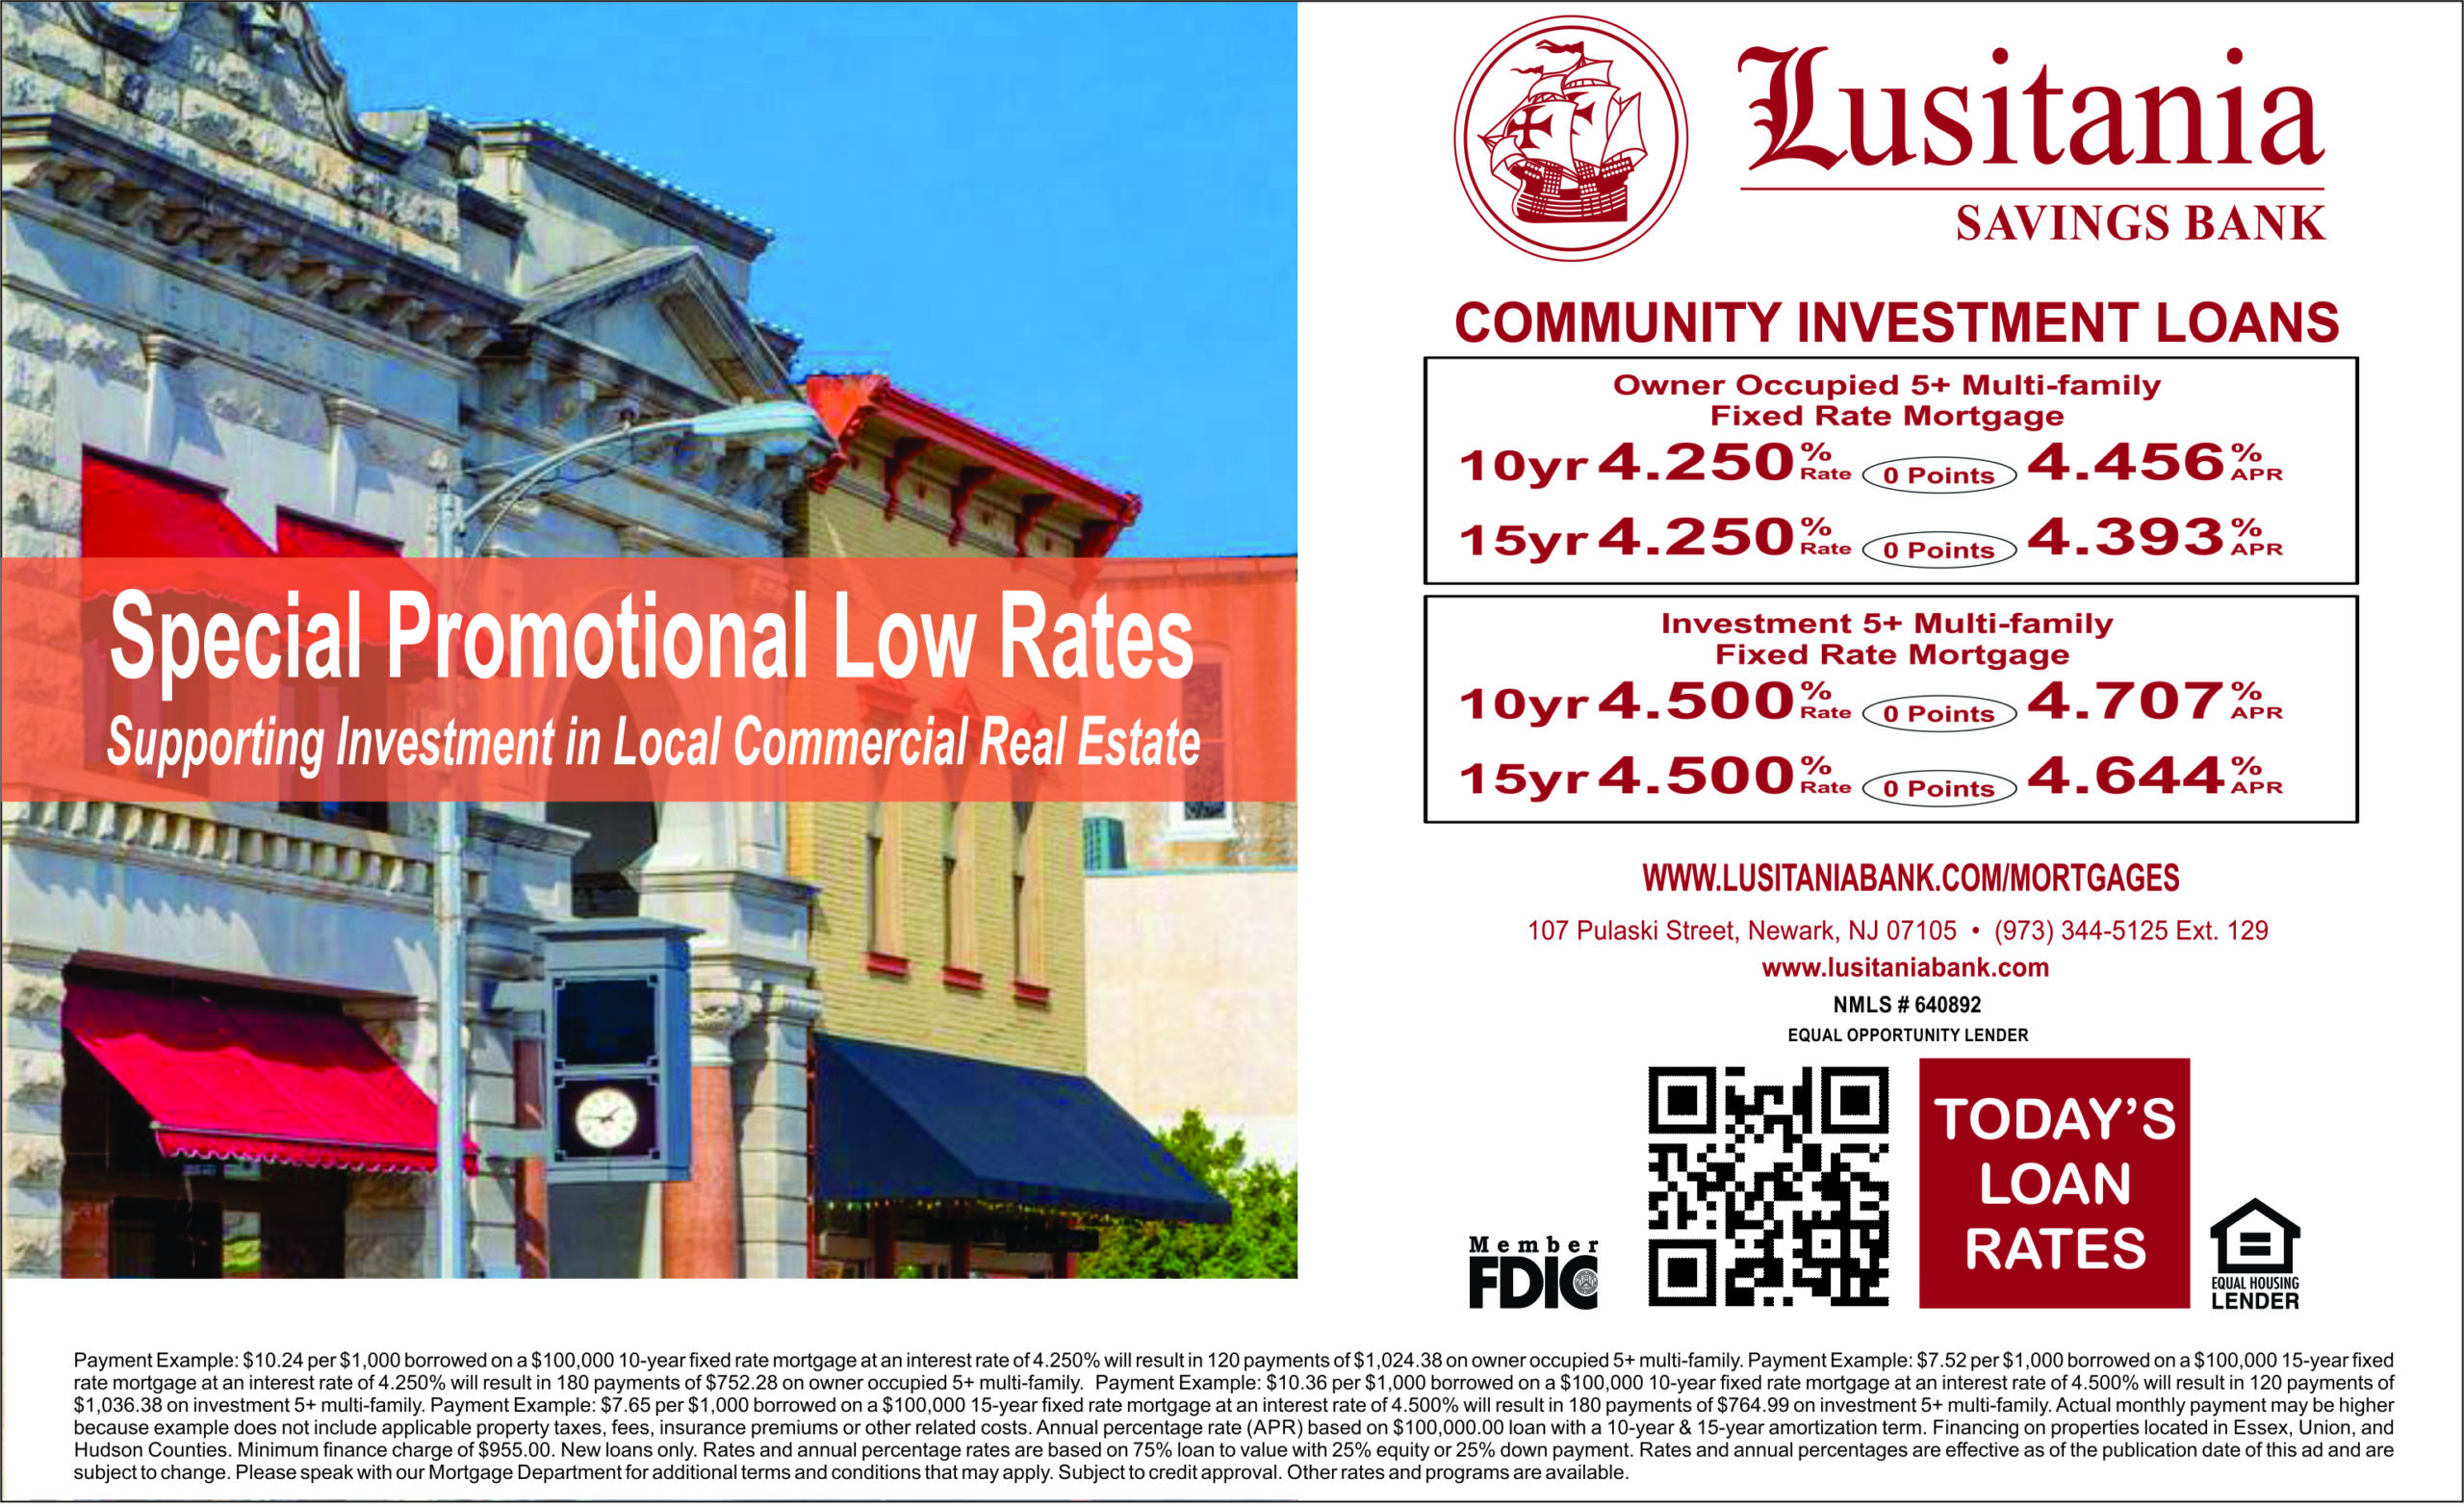 Community Investment Loans